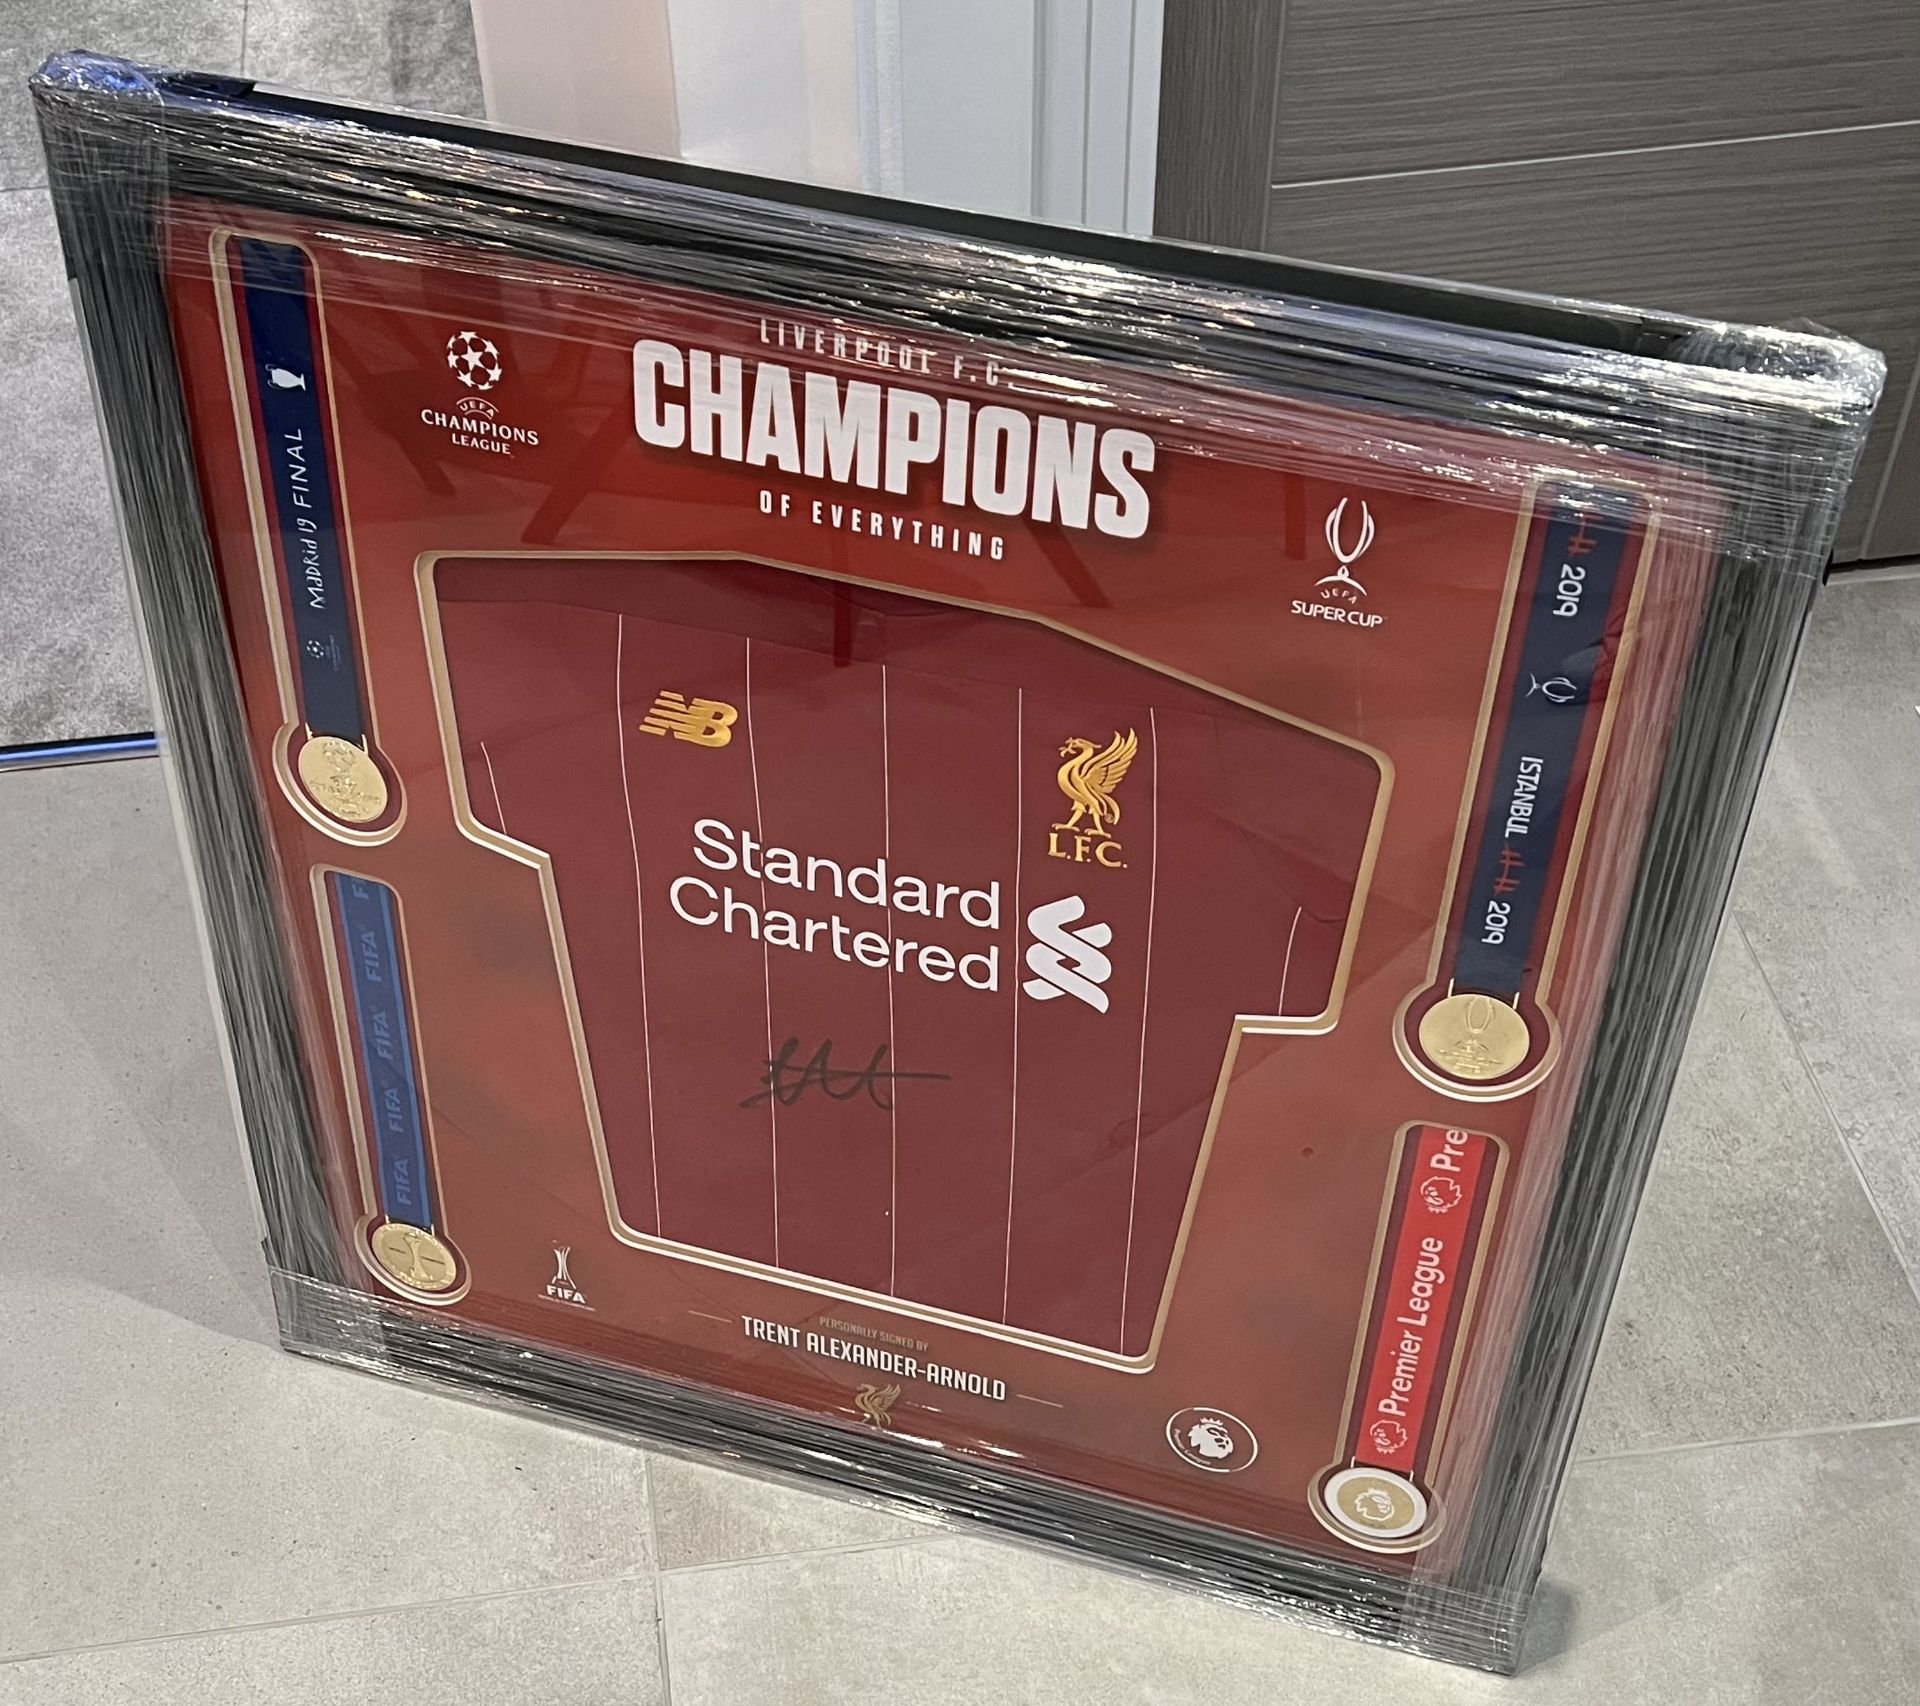 Trent Alexander-Arnold hand Signed Liverpool Champions framed football shirt with inset winners